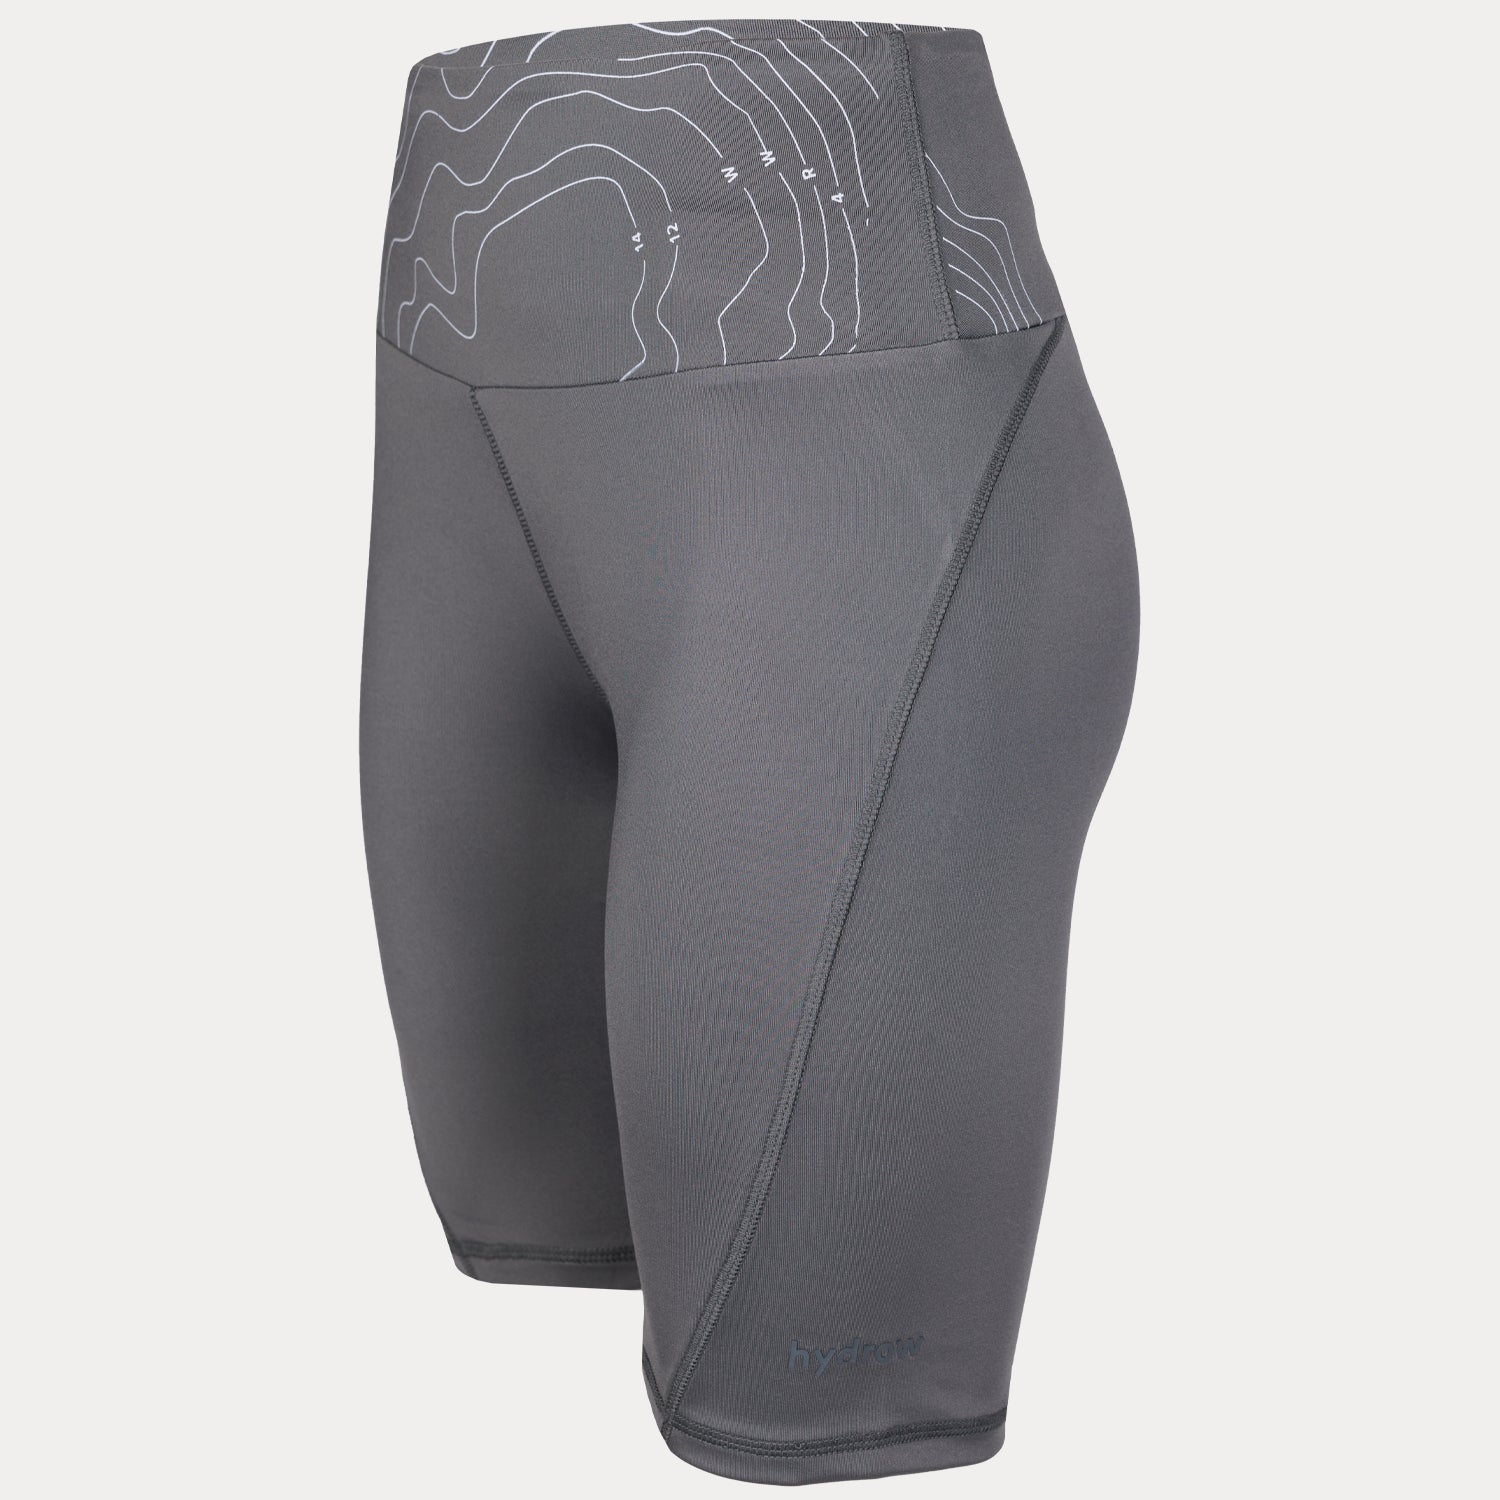 Men's Compression-Lined 7 Short - Hydrow Apparel Store